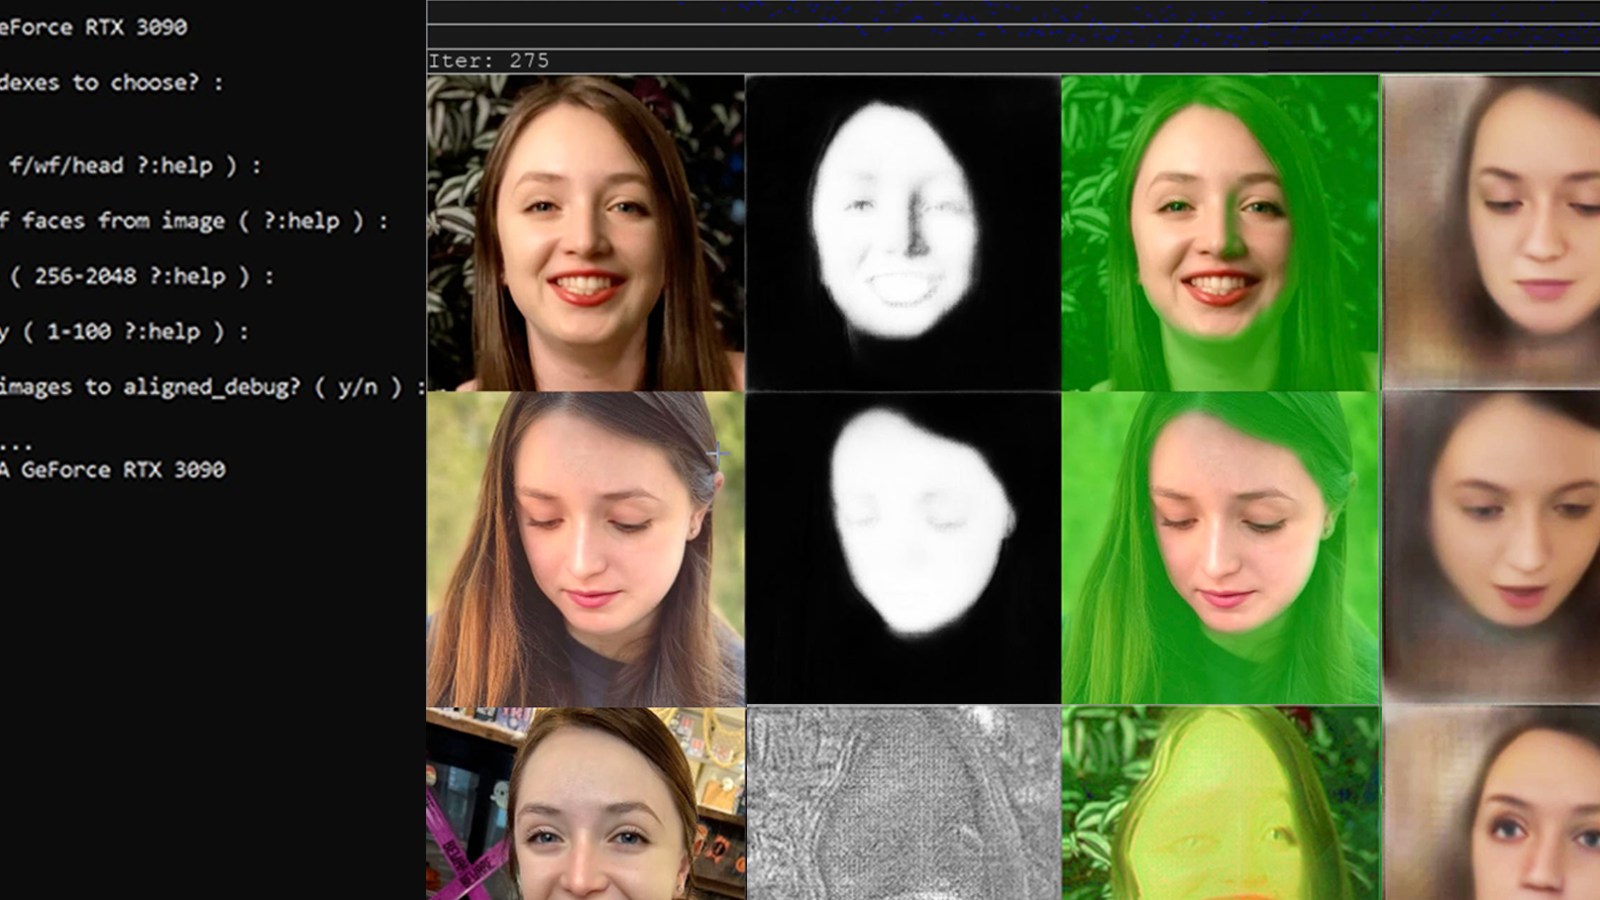 A College Girl Found Deepfake Porn of Herself Online. Who Did It Shocked Her